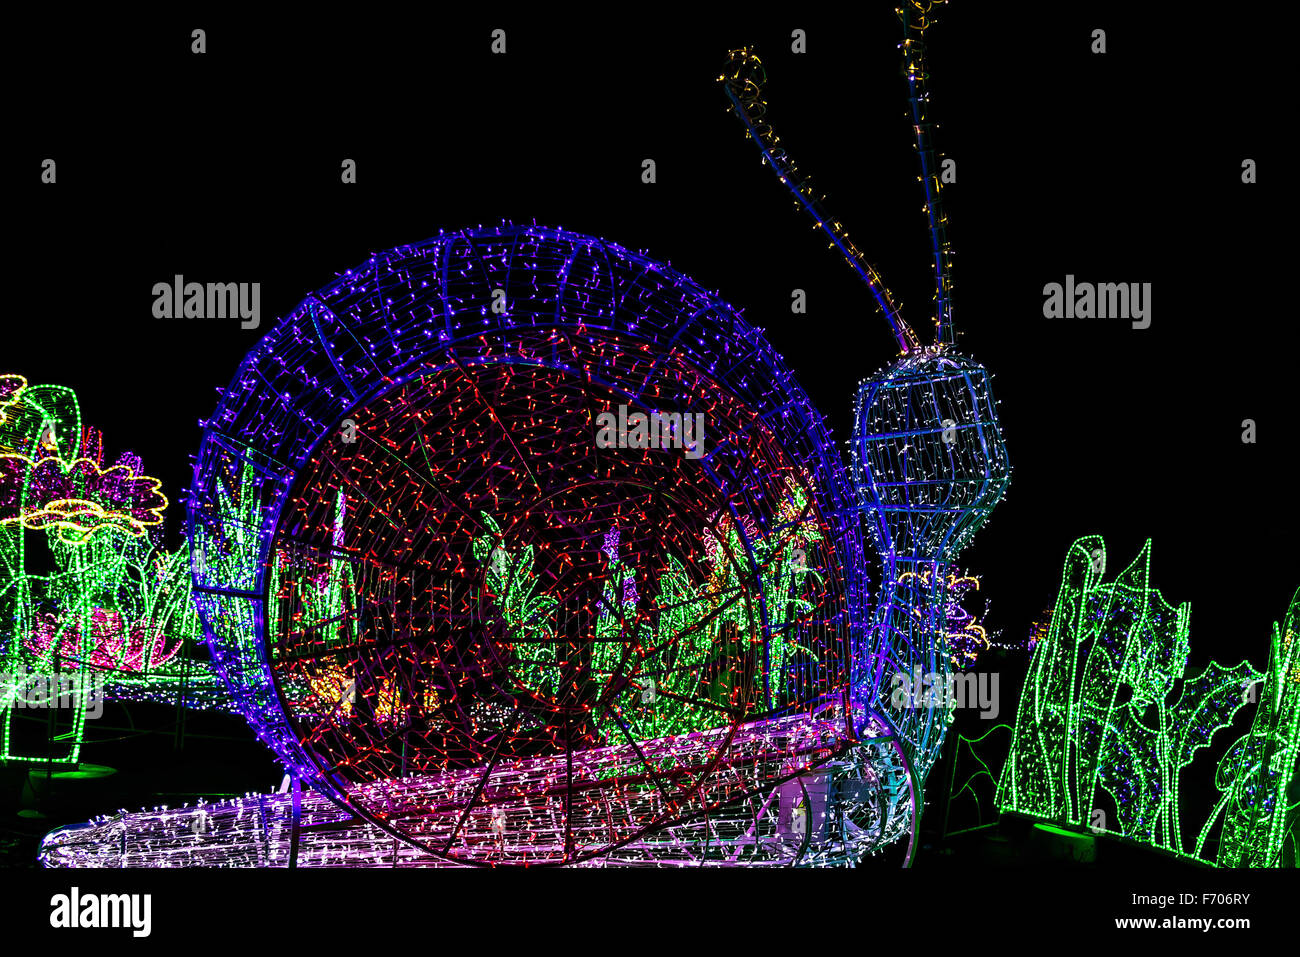 Construction in Form of Snail in Multicolored Christmas Lamps Stock Photo